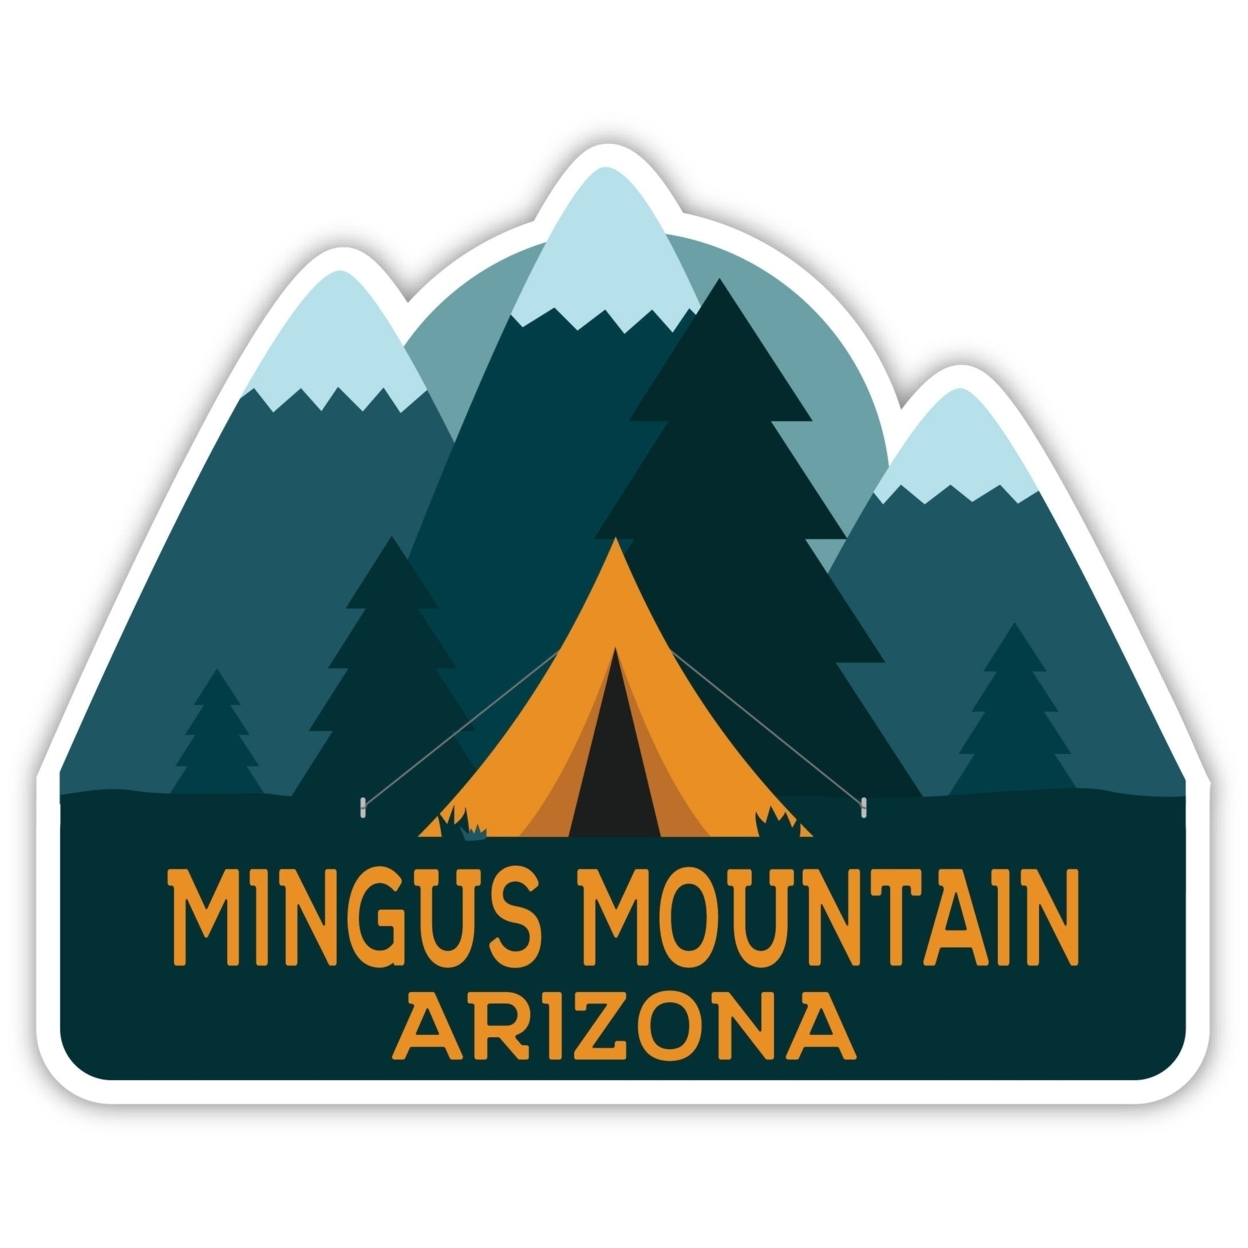 Mingus Mountain Arizona Souvenir Decorative Stickers (Choose Theme And Size) - 2-Inch, Great Outdoors